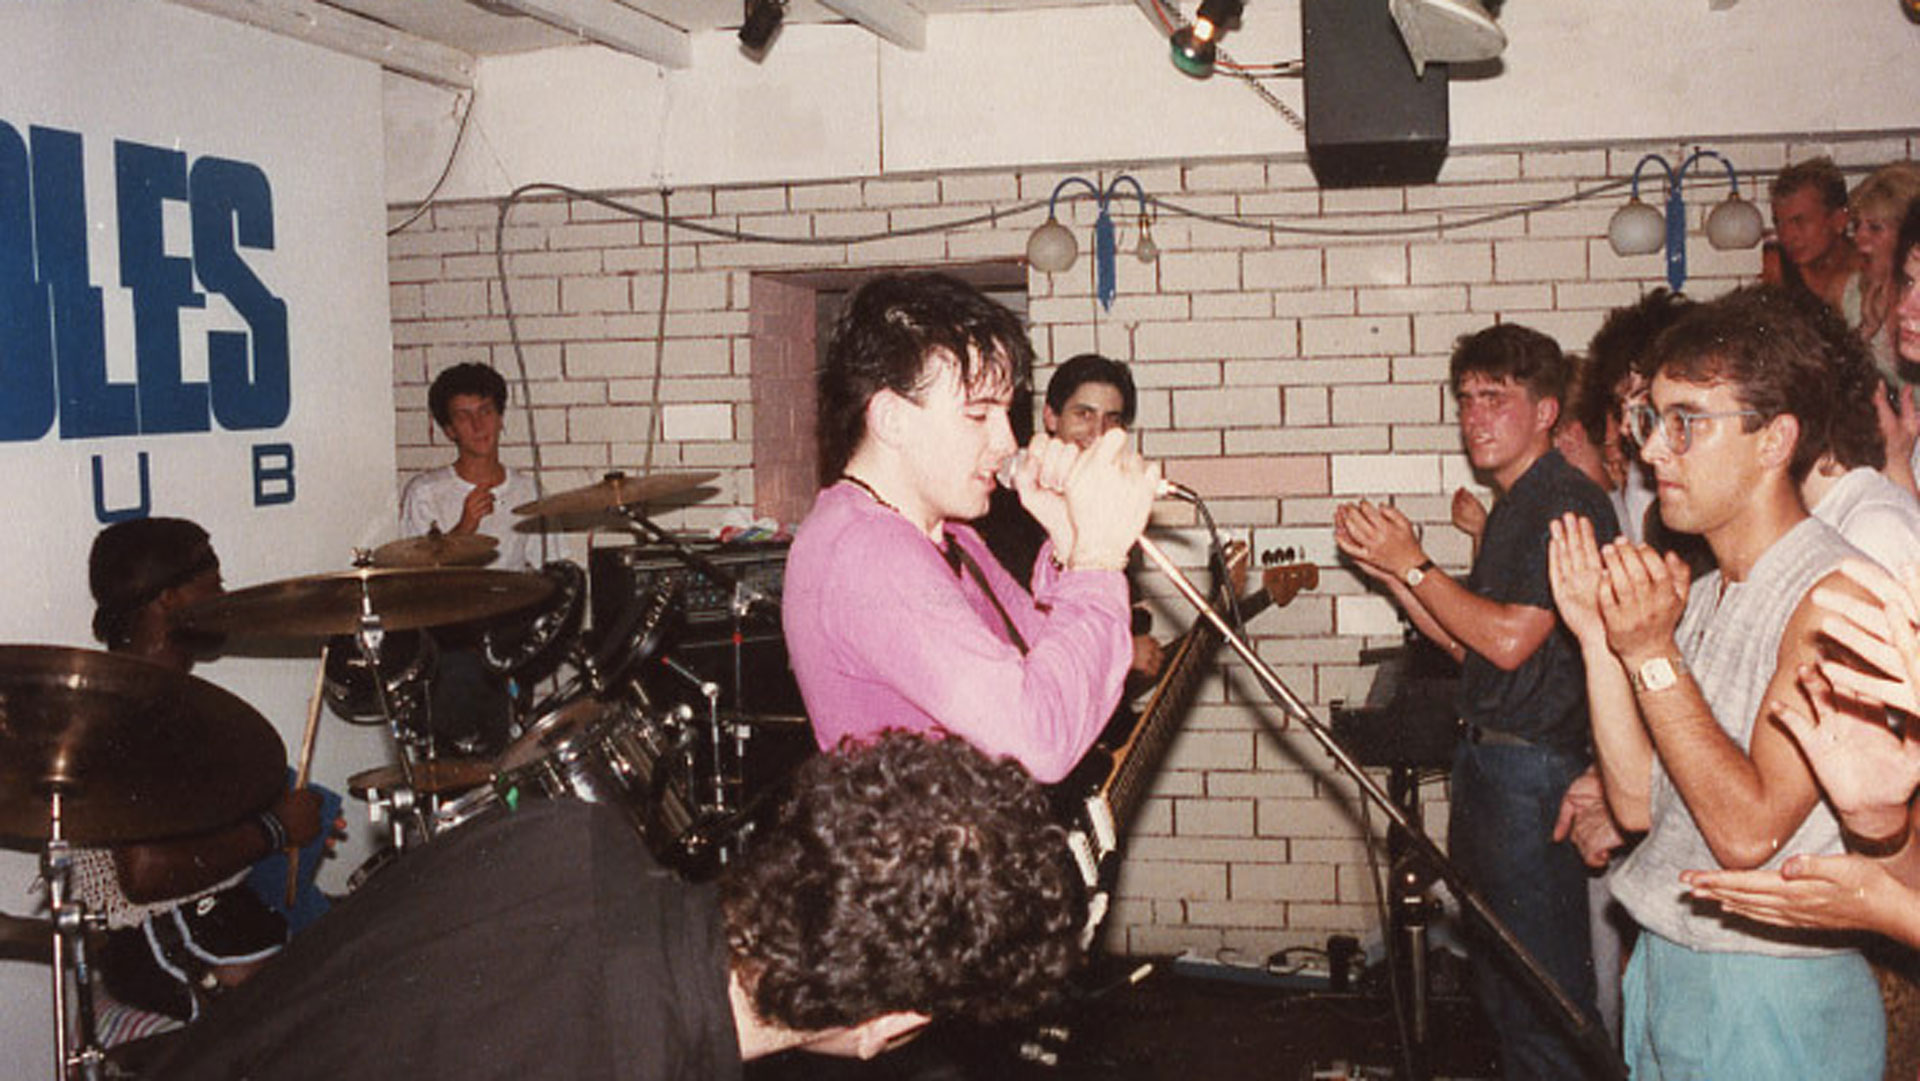 The Cure playing at Moles in Bath